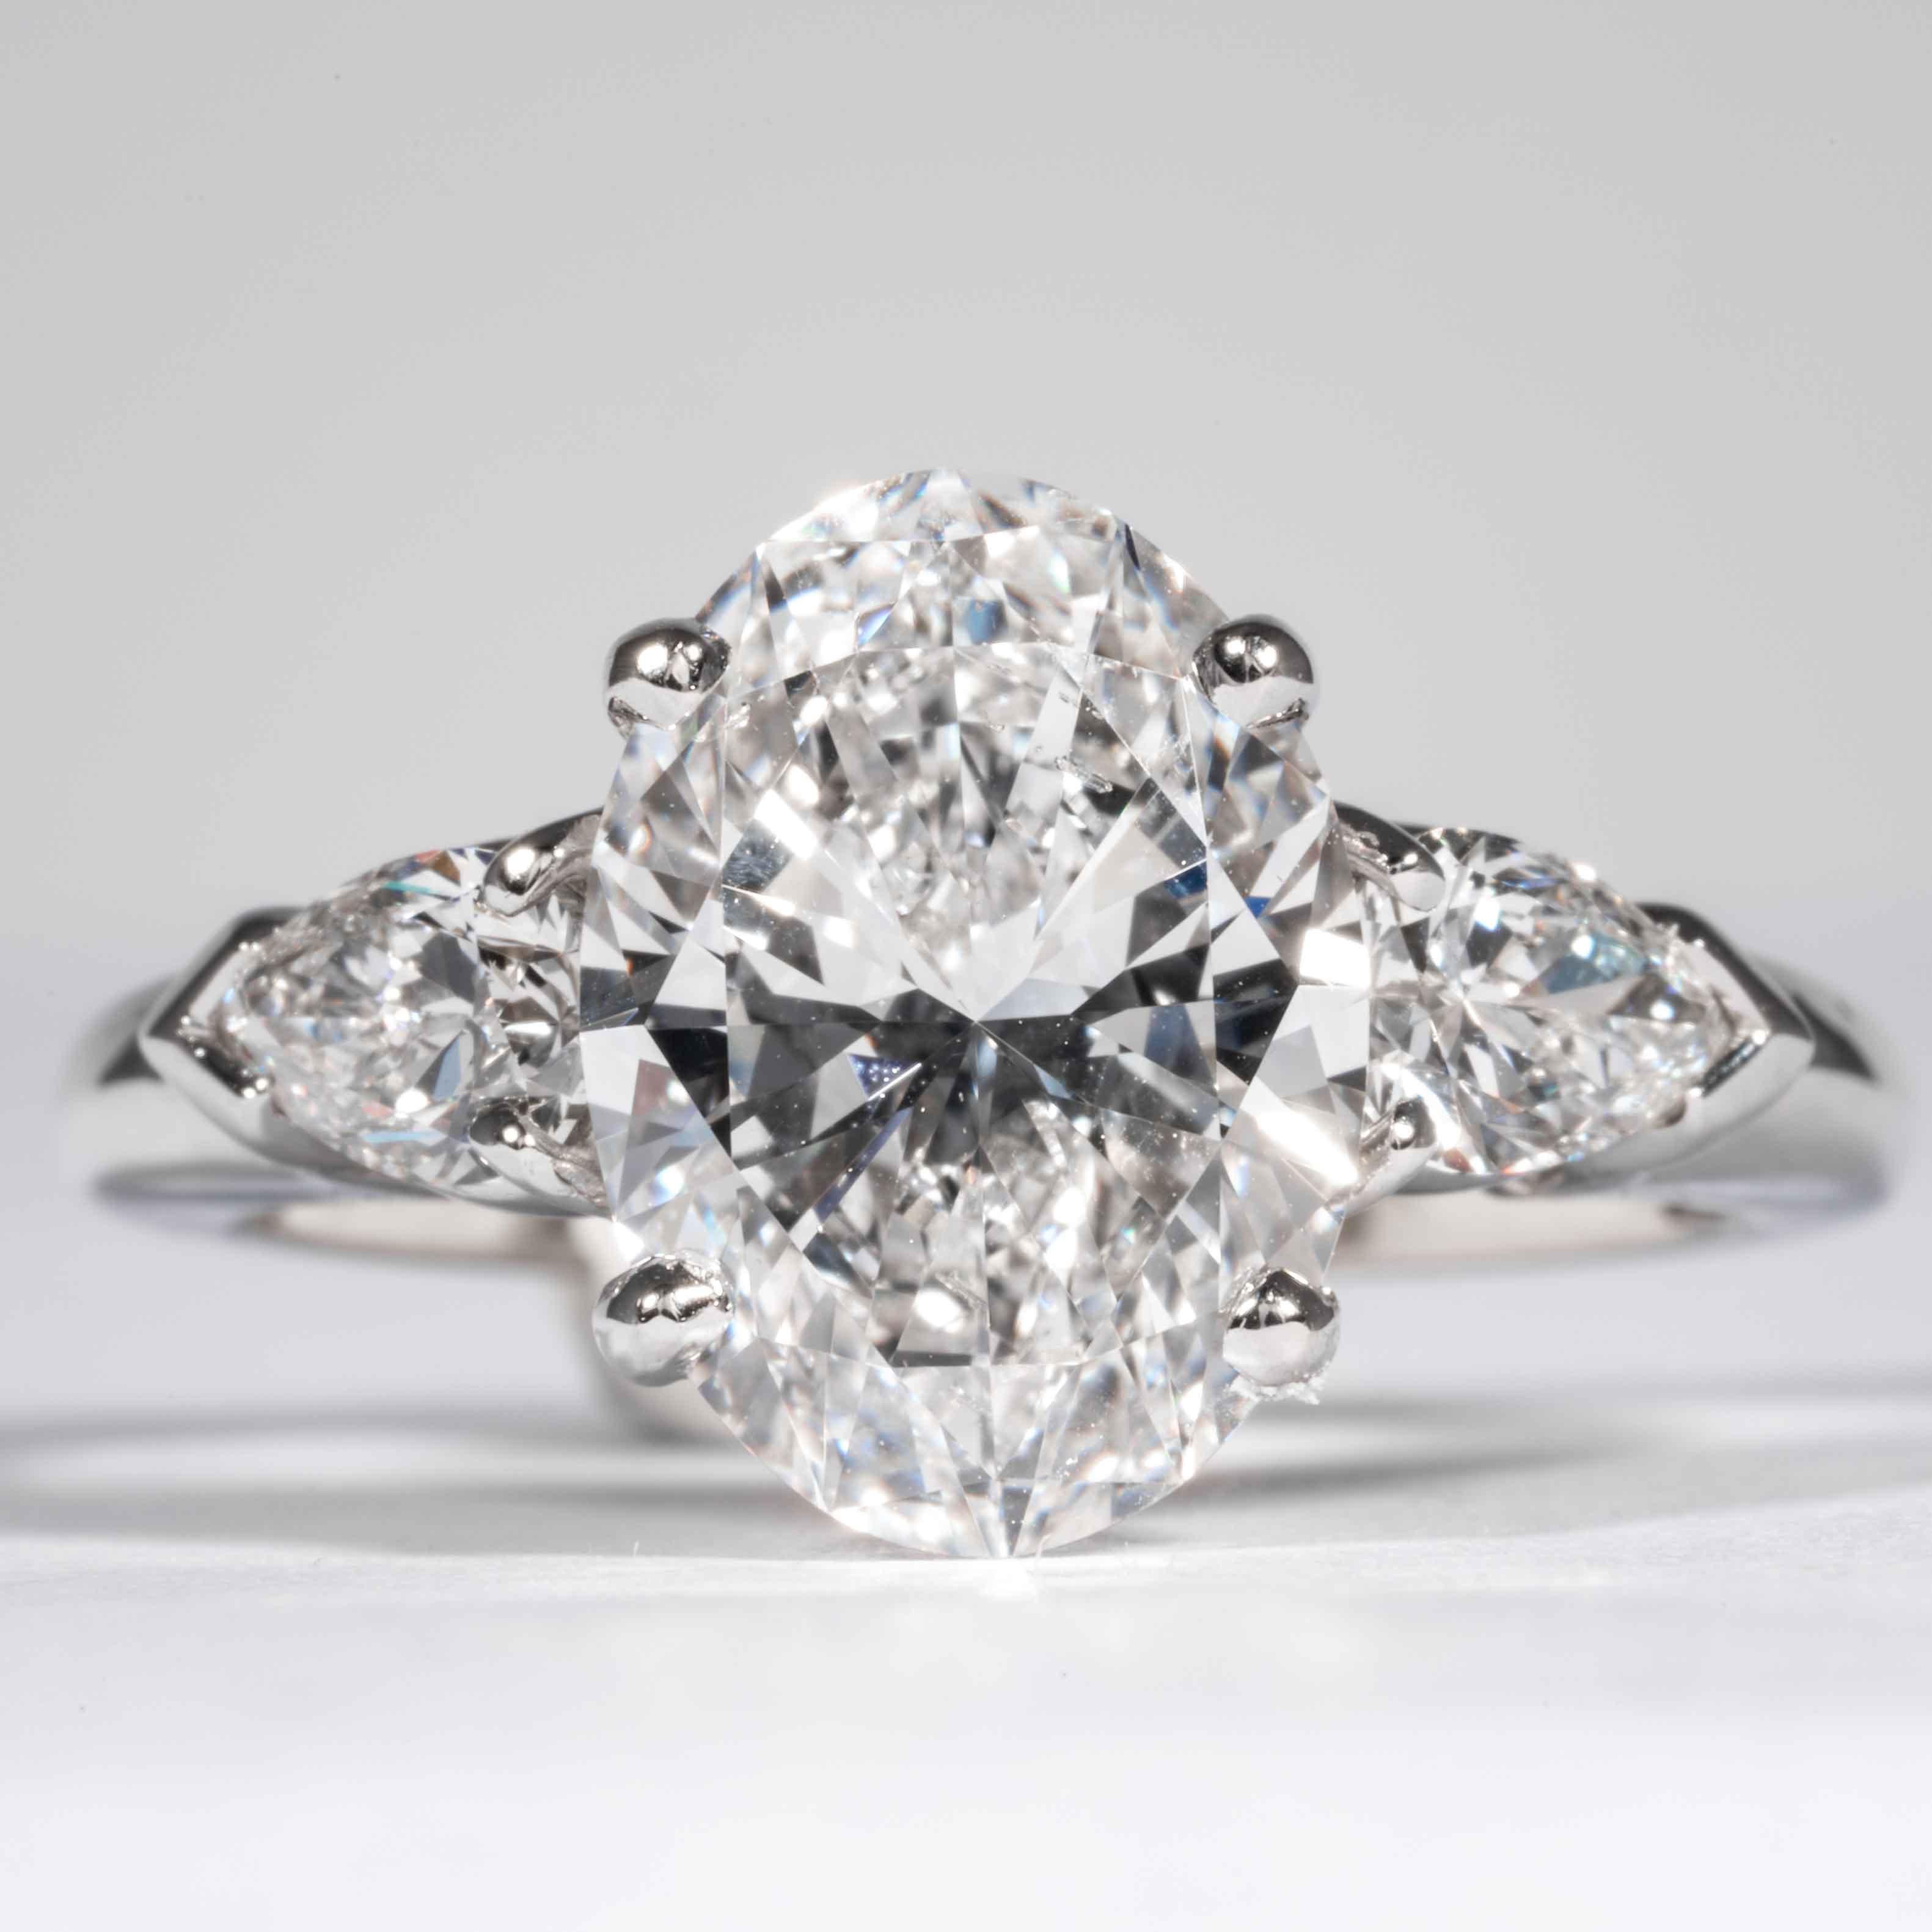 This classic oval cut diamond ring is offered by Shreve, Crump & Low. This 3.20 carat GIA Certified D SI1 Oval cut diamond measuring 11.71 x 8.47 x 5.14 mm is custom set in a handcrafted Shreve, Crump & Low classic platinum 3-stone ring. The 3.20